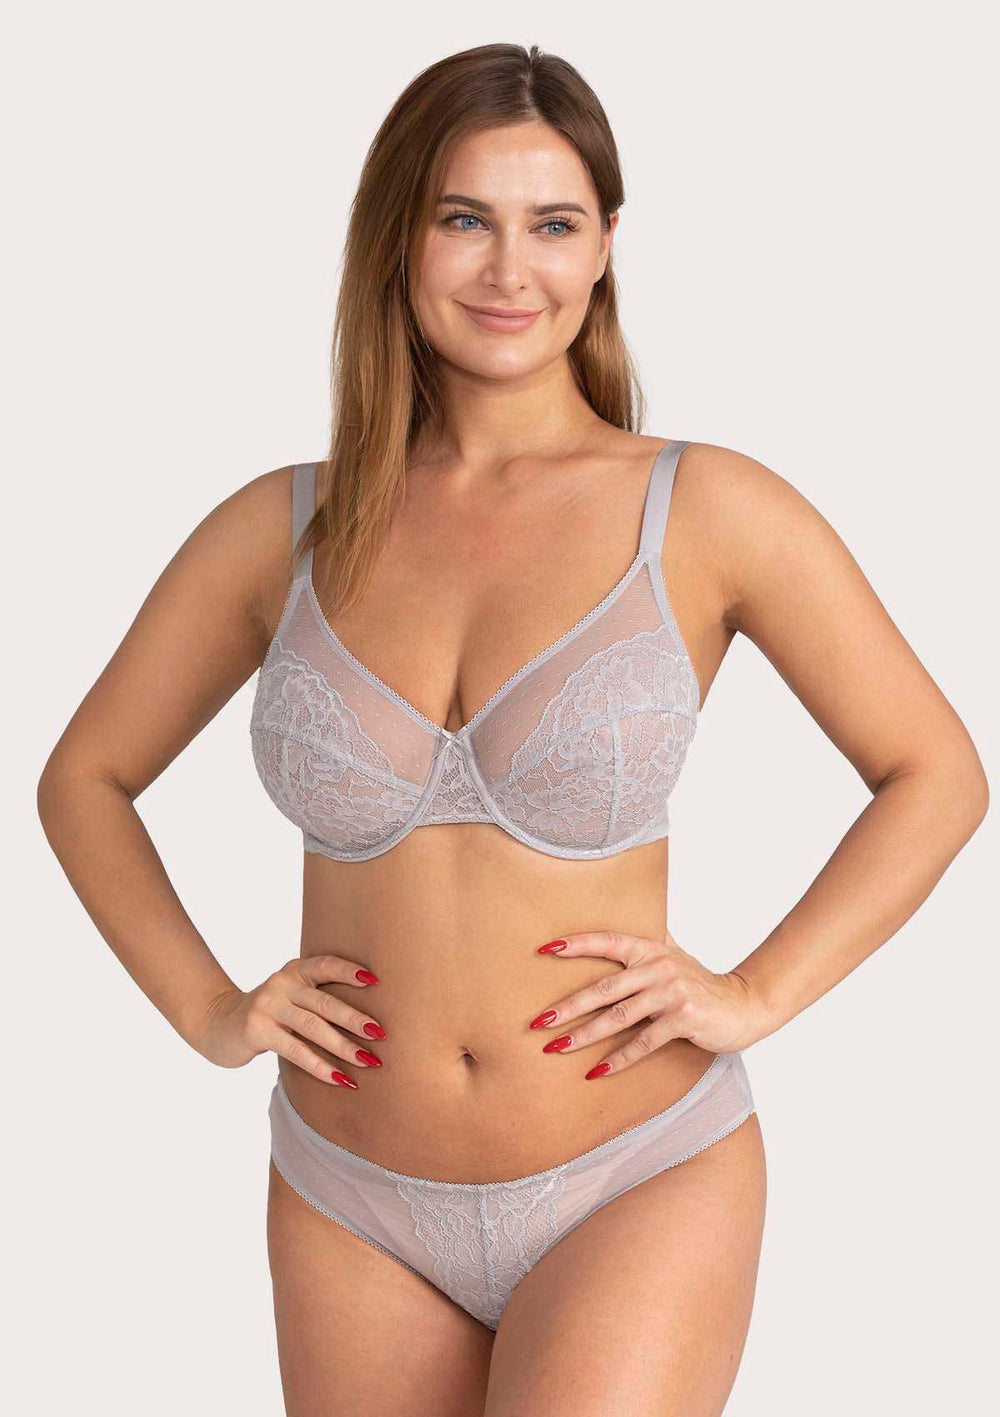 HSIA Enchante Lace Bra and Panties Set: Back Support Bra for Posture